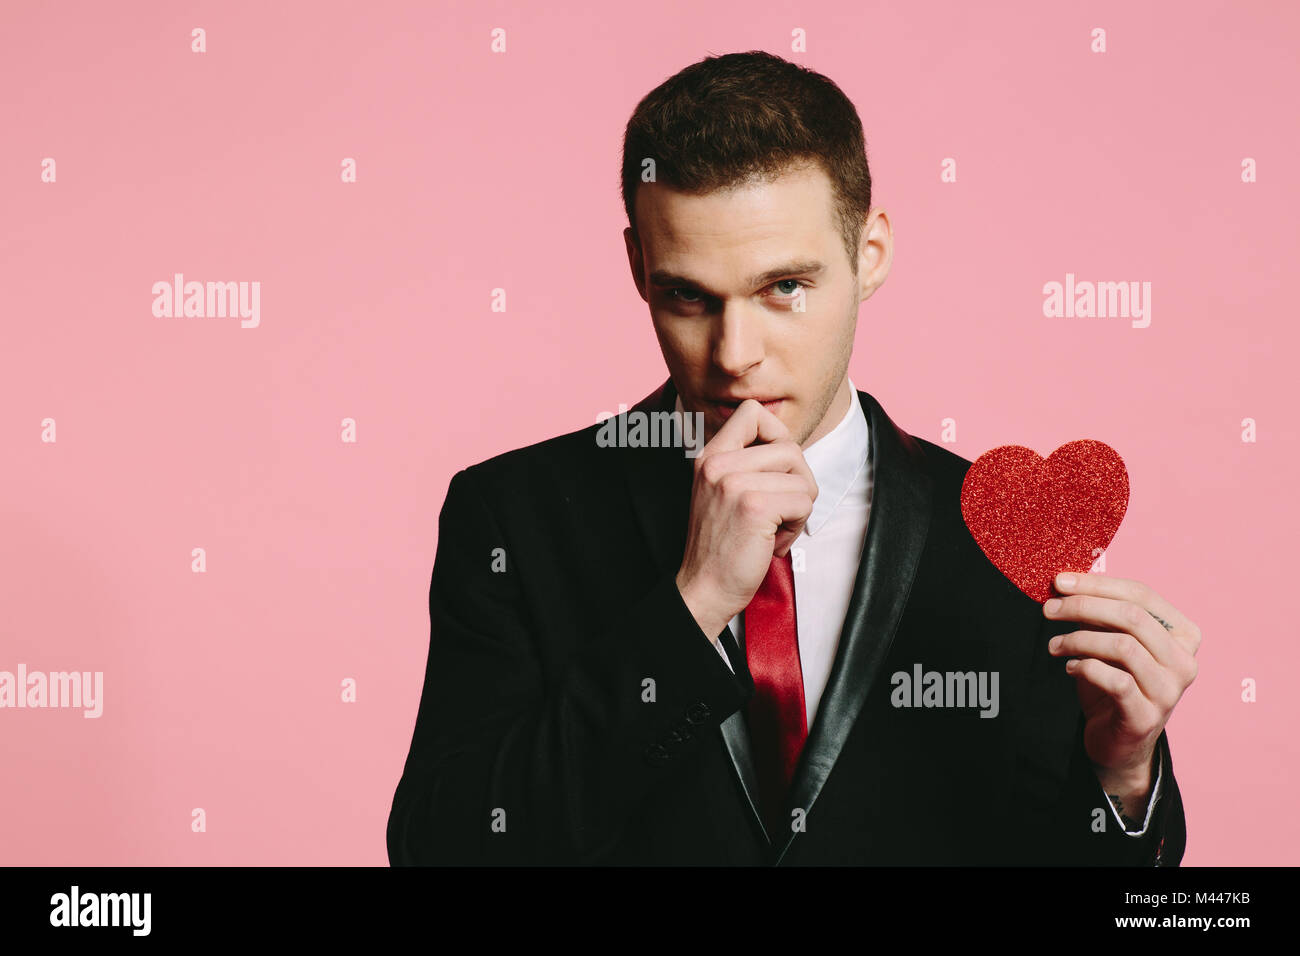 Handsome man in a black suit holding a red heart for Valentine's Day Stock Photo